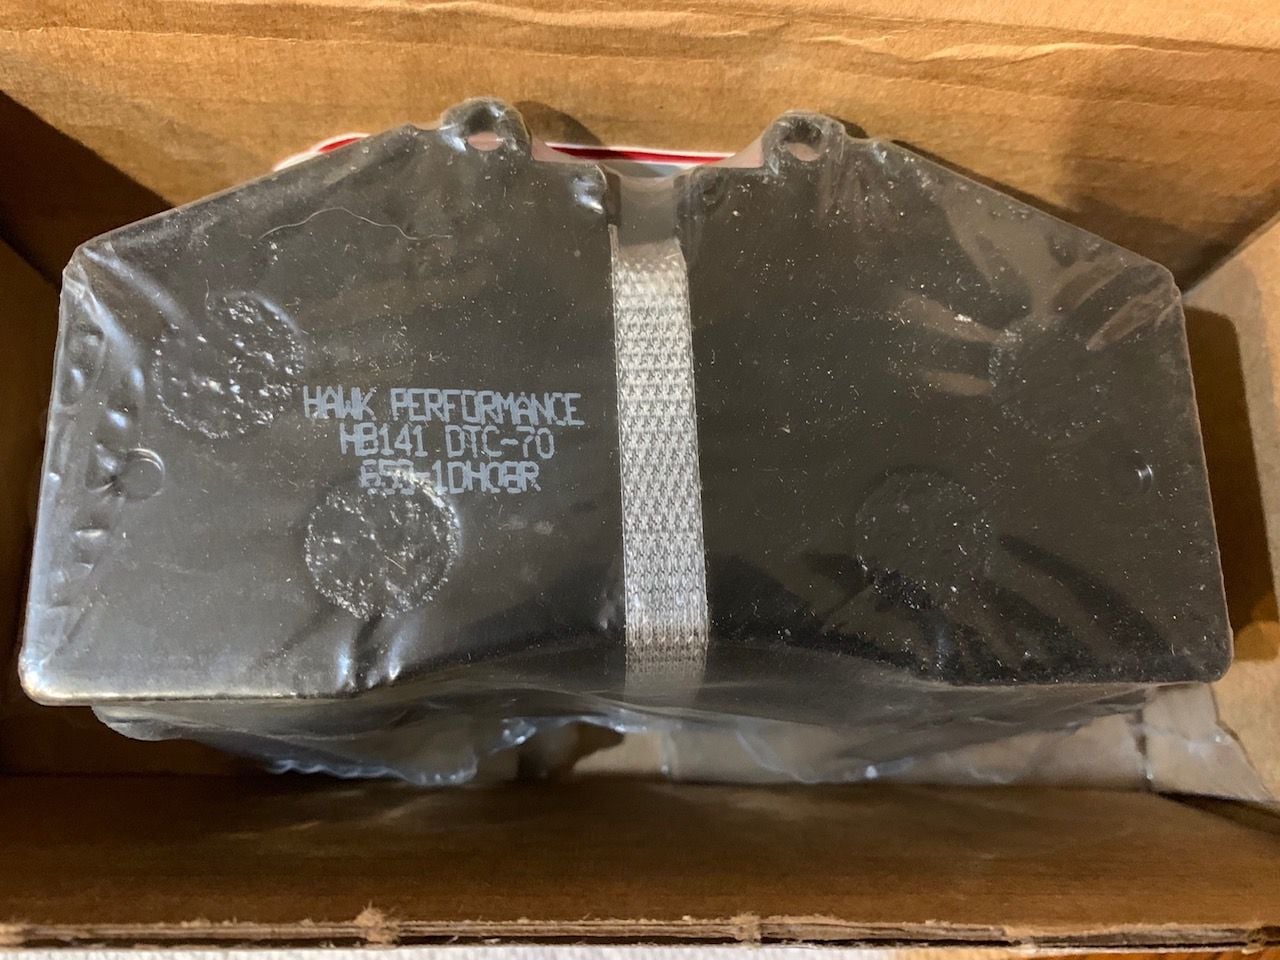 Brakes - HAWK HB141U.650 Brake Pads (DTC-70) - work with StopTech ST-40 brake calipers - New - Columbus, IN 47203, United States